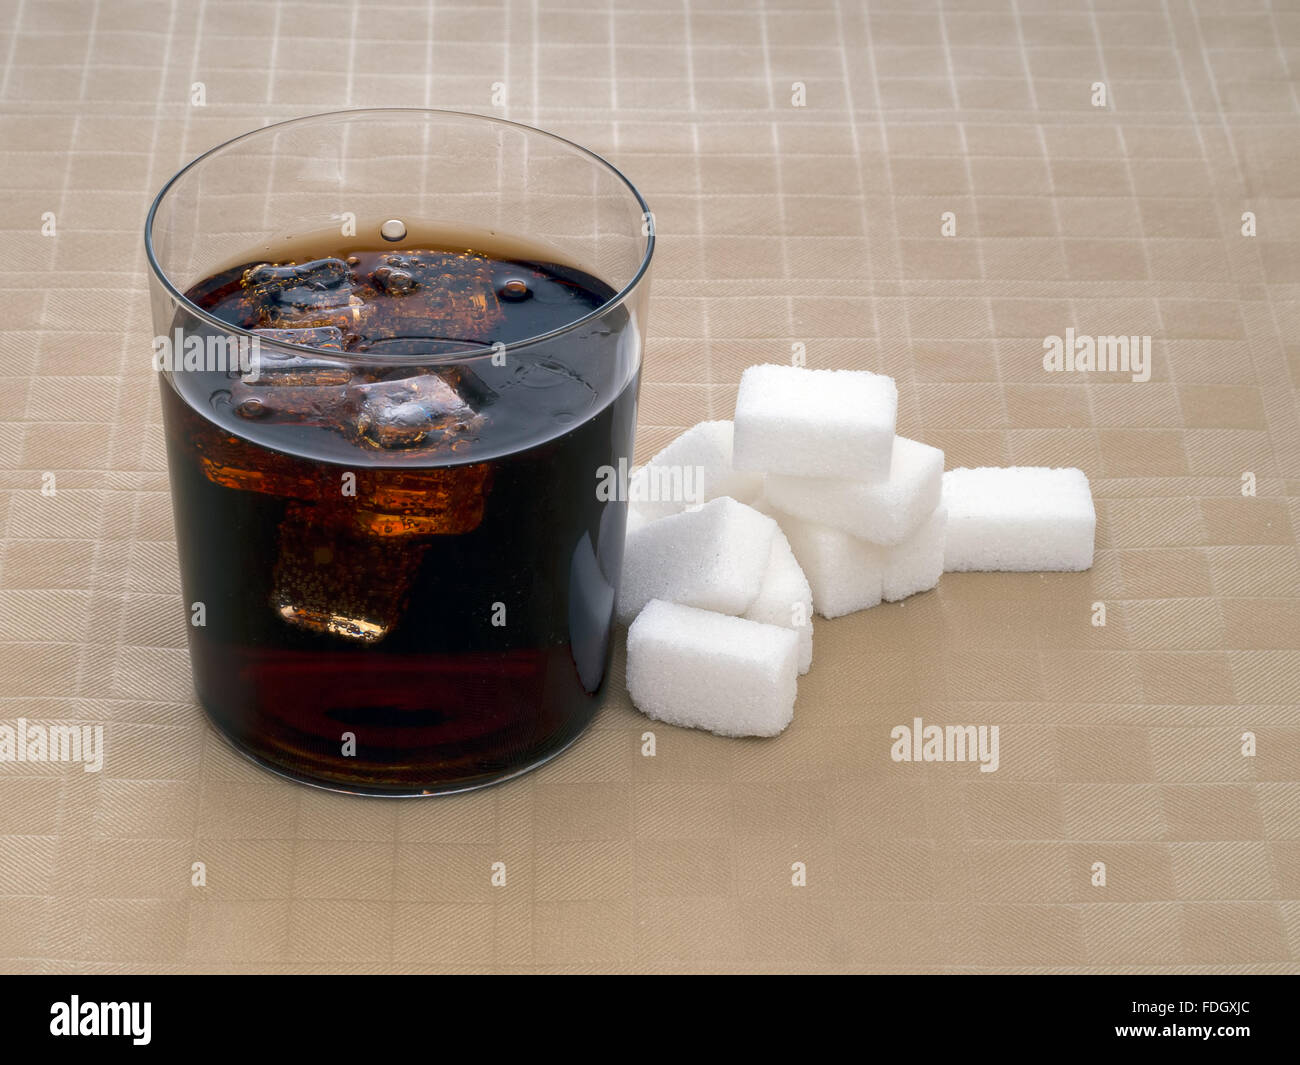 Sugar, calories in fizzy carbonated soft drinks, cola. Stock Photo